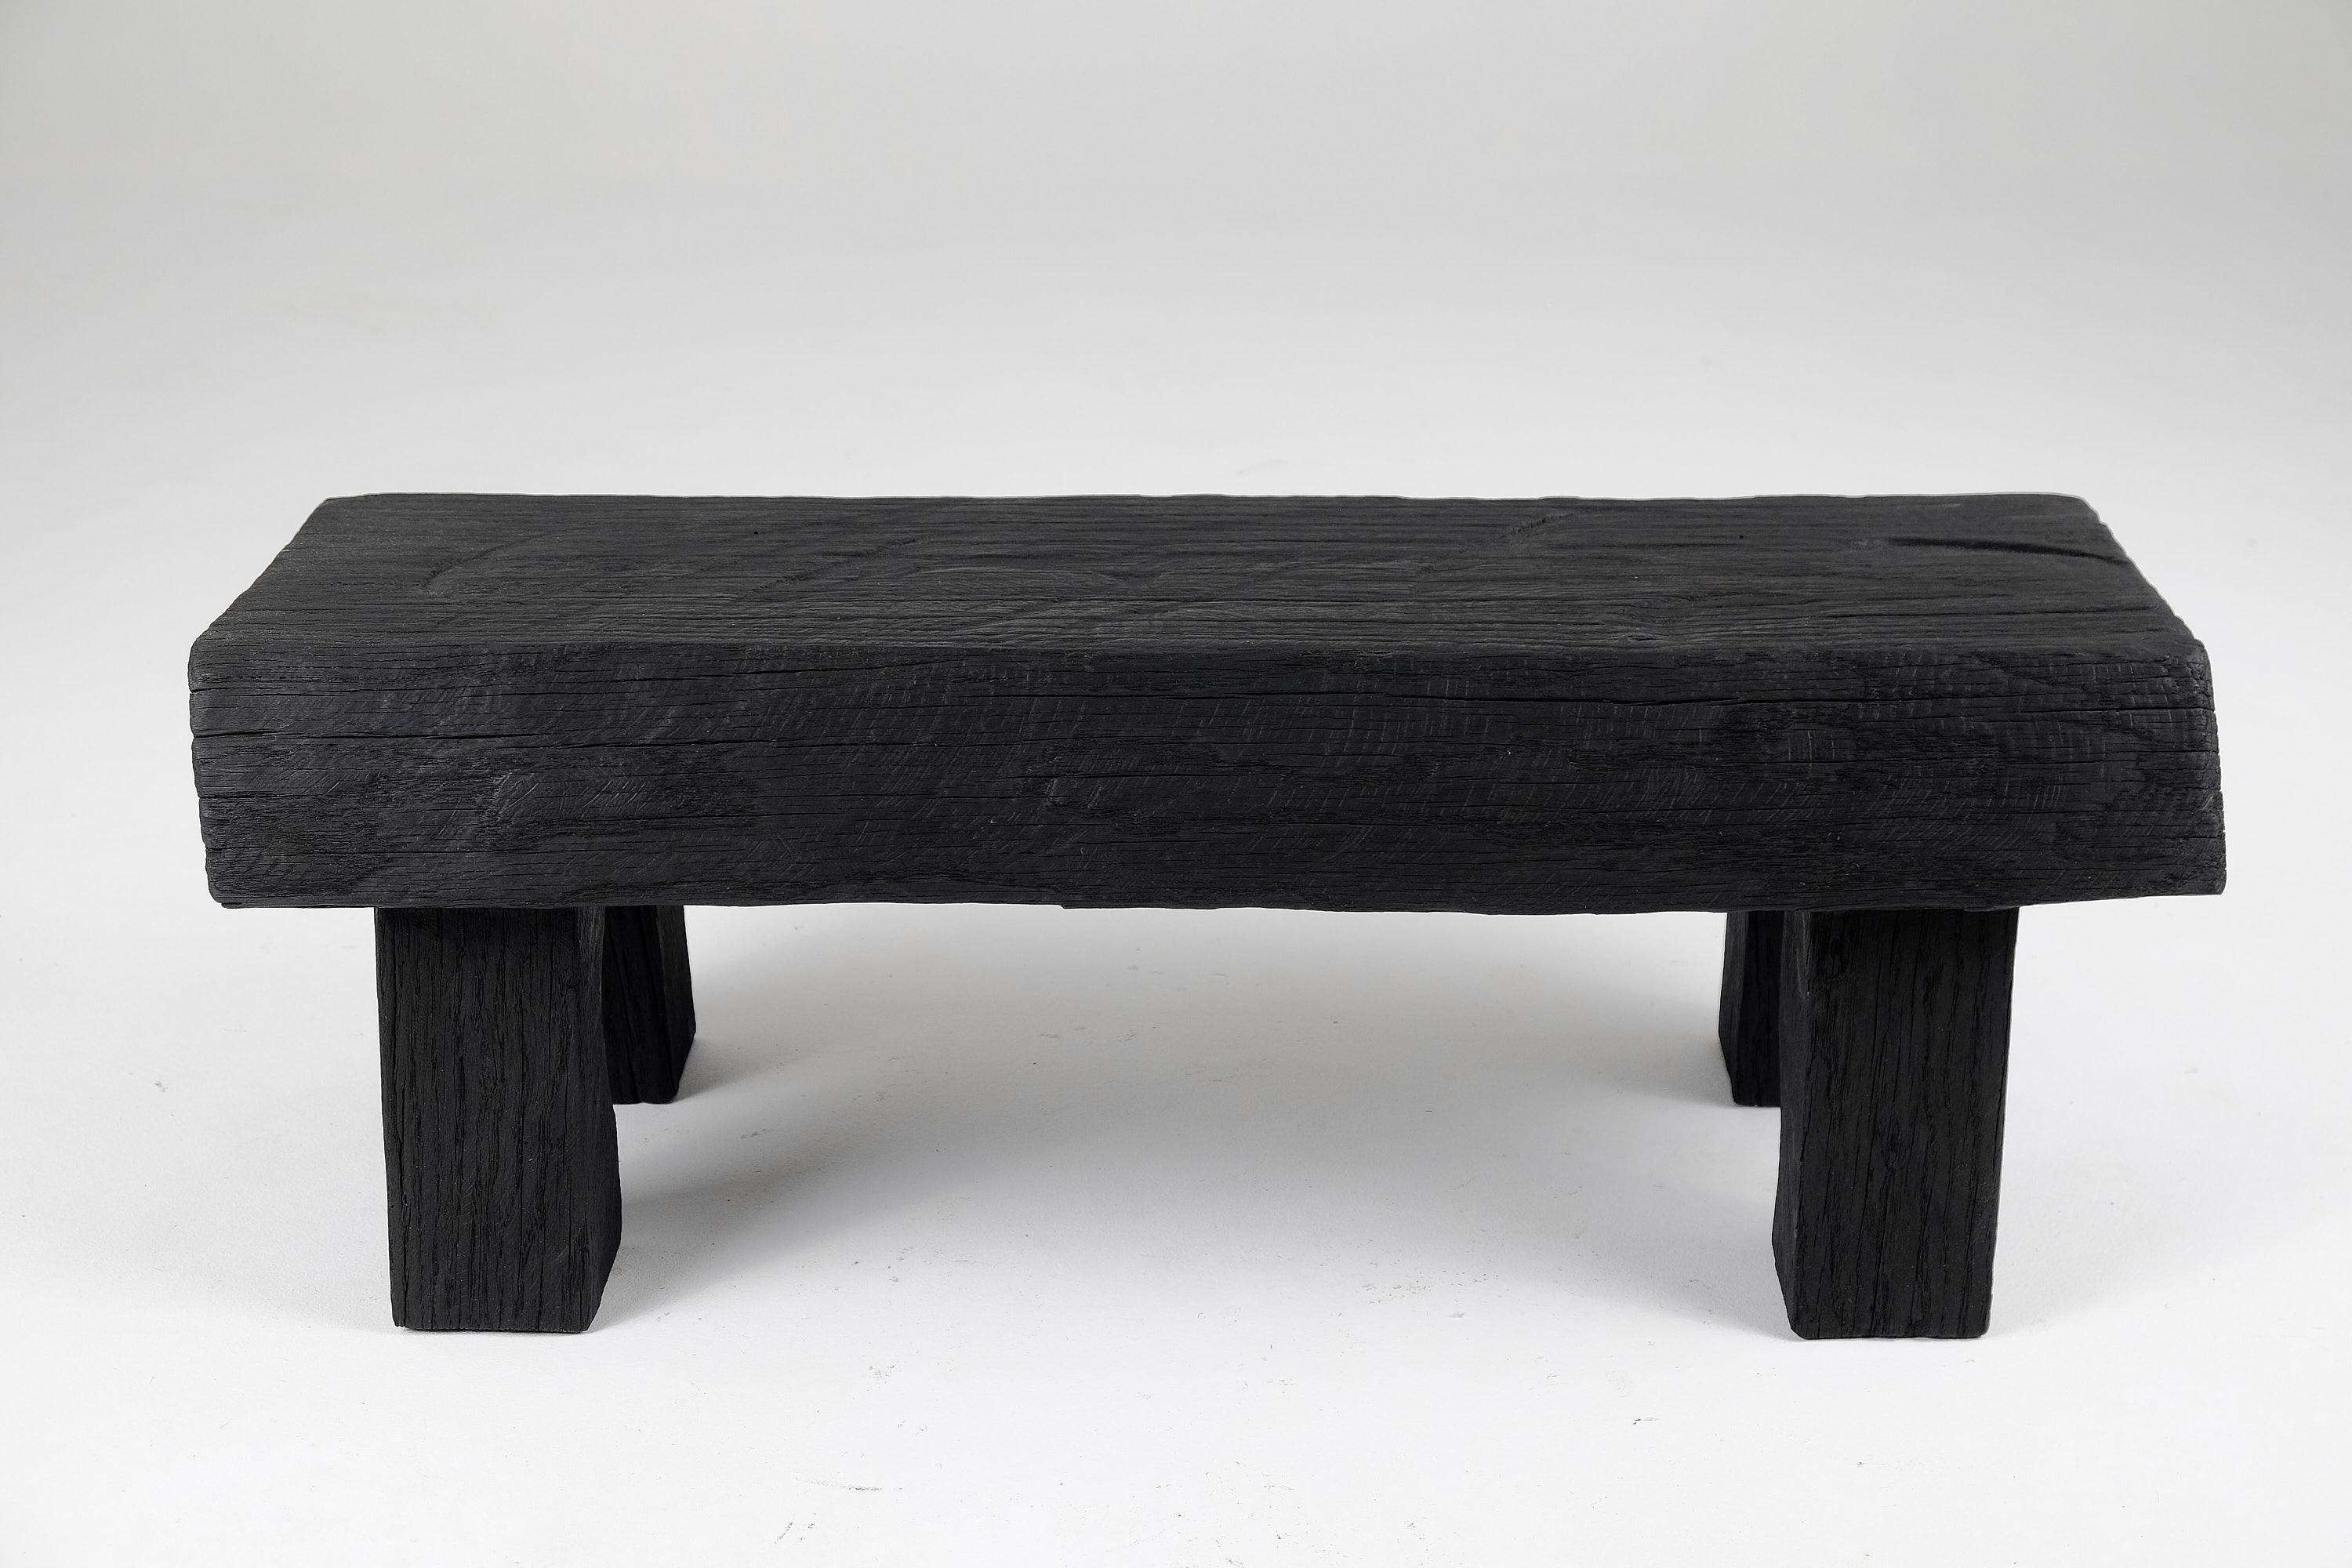 Unique bench/side table with original design by Logniture. Made entirely from wood. Protected with the highest quality oils, ensuring durability for generations. Such unique handmade design will highlight your interior and bring comfort to your